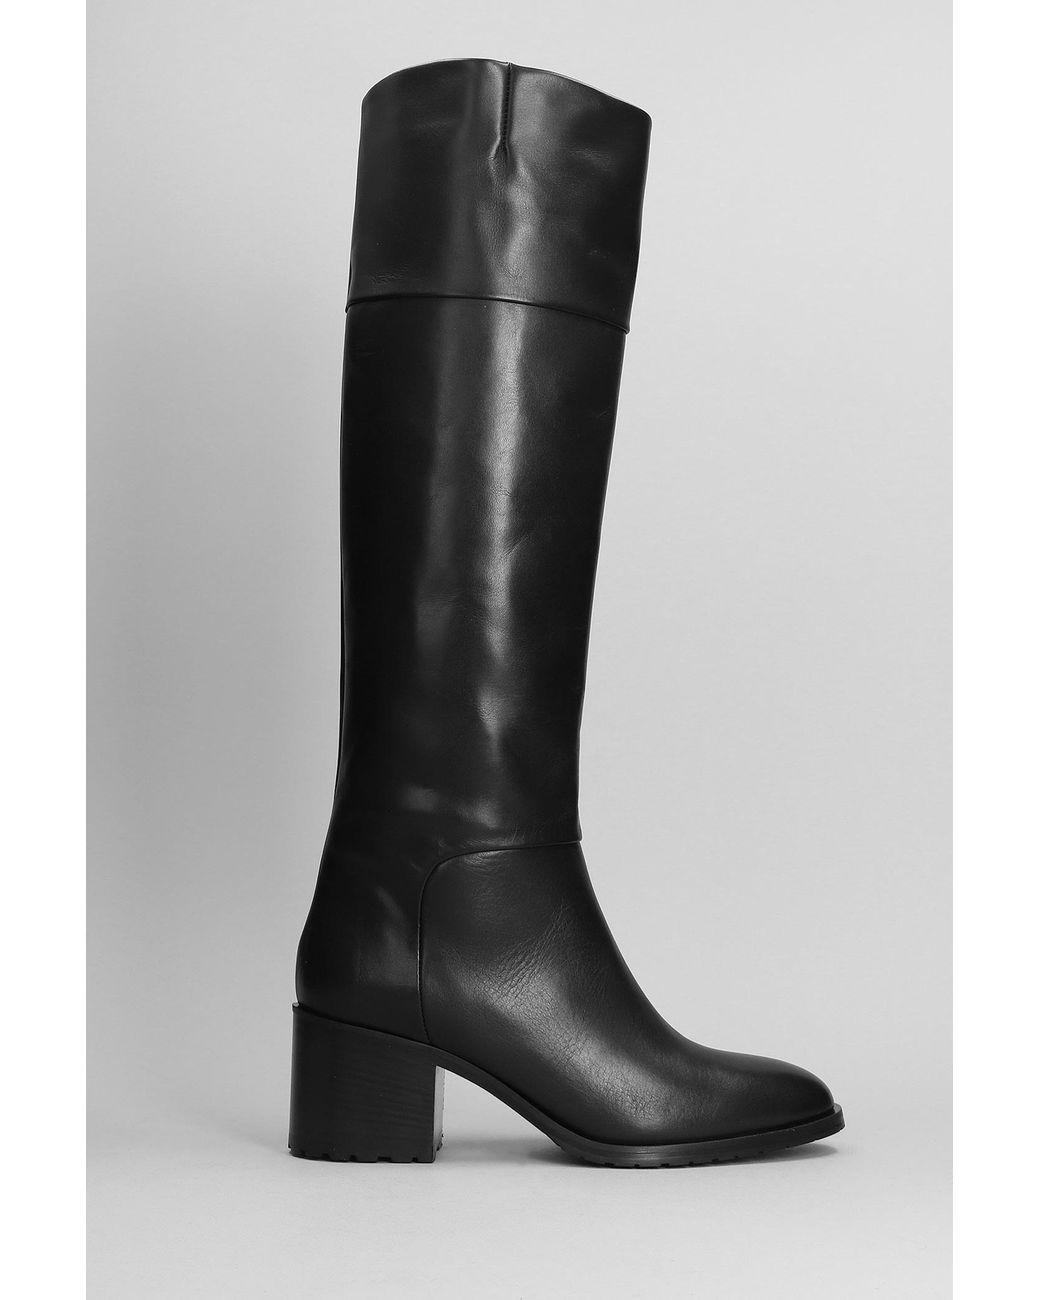 Fabio Rusconi High Heels Boots In Black Leather | Lyst